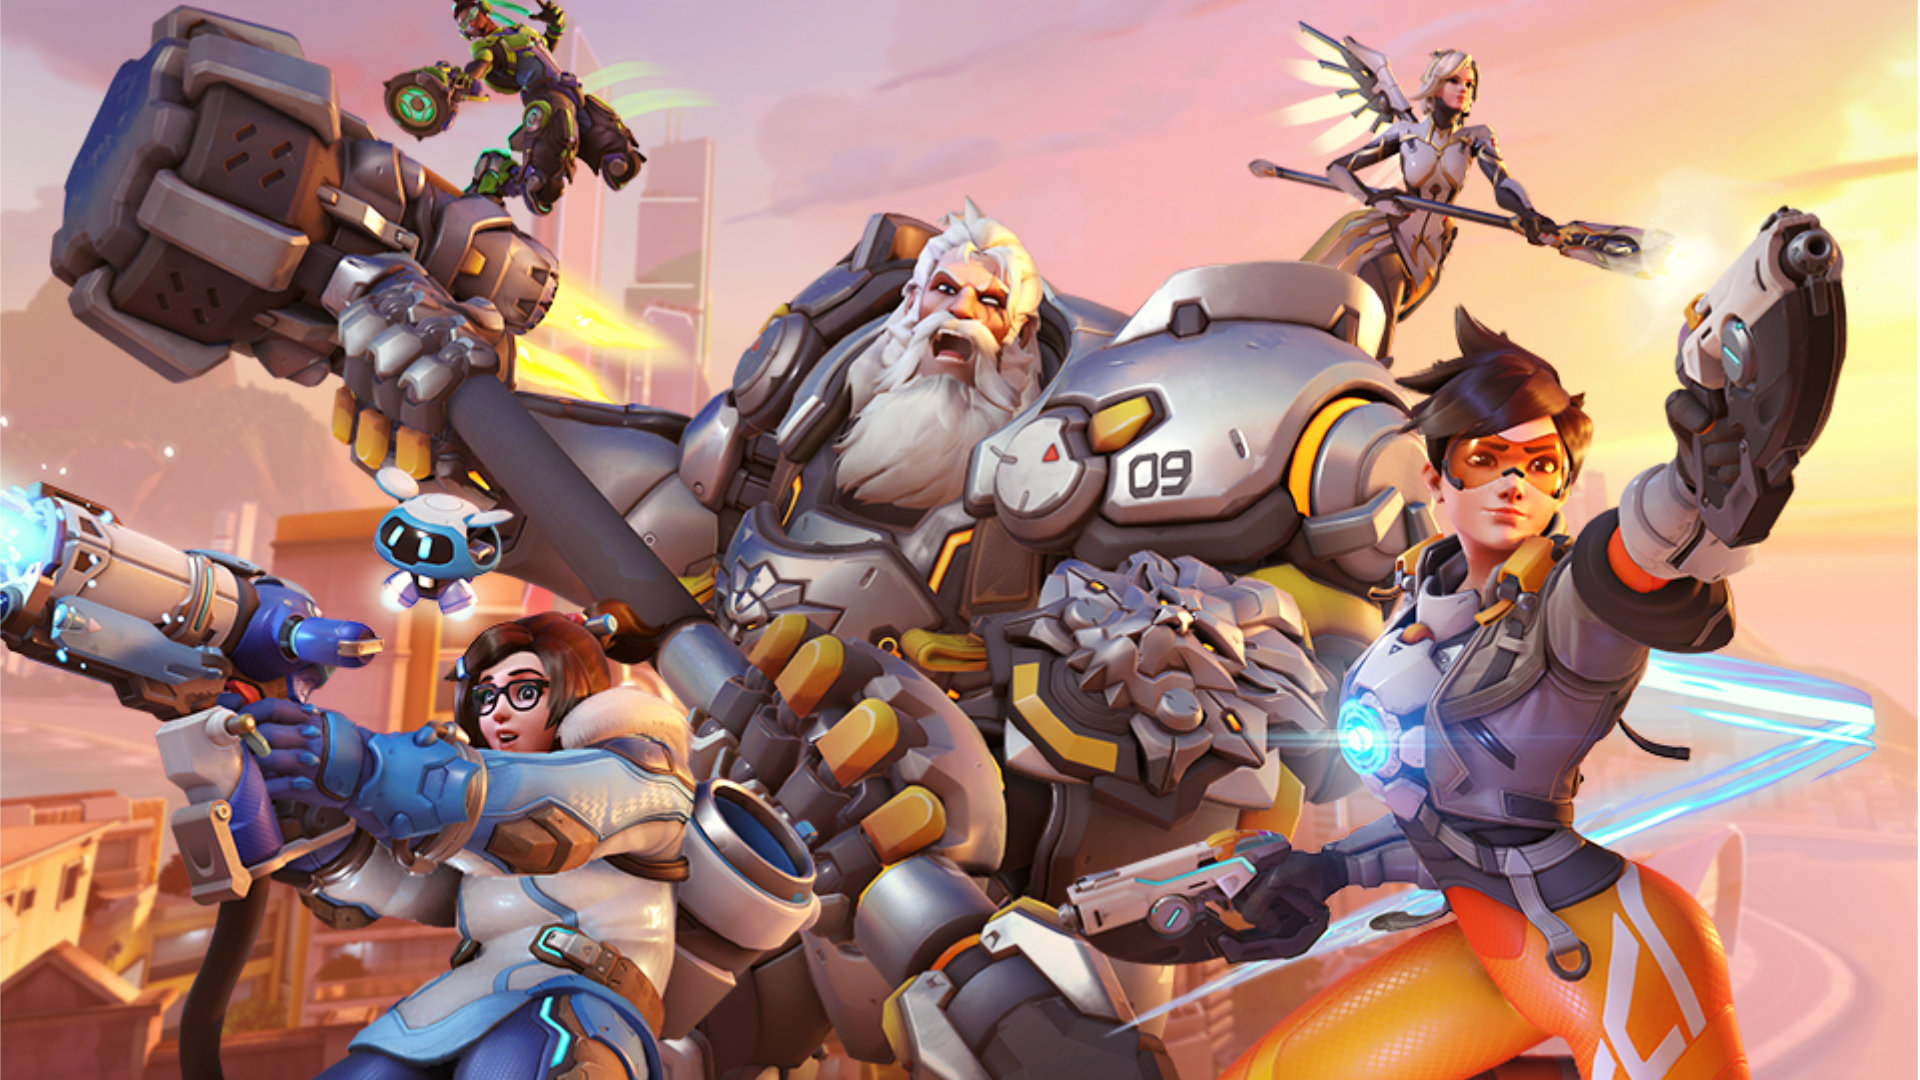 Overwatch 2 system requirements